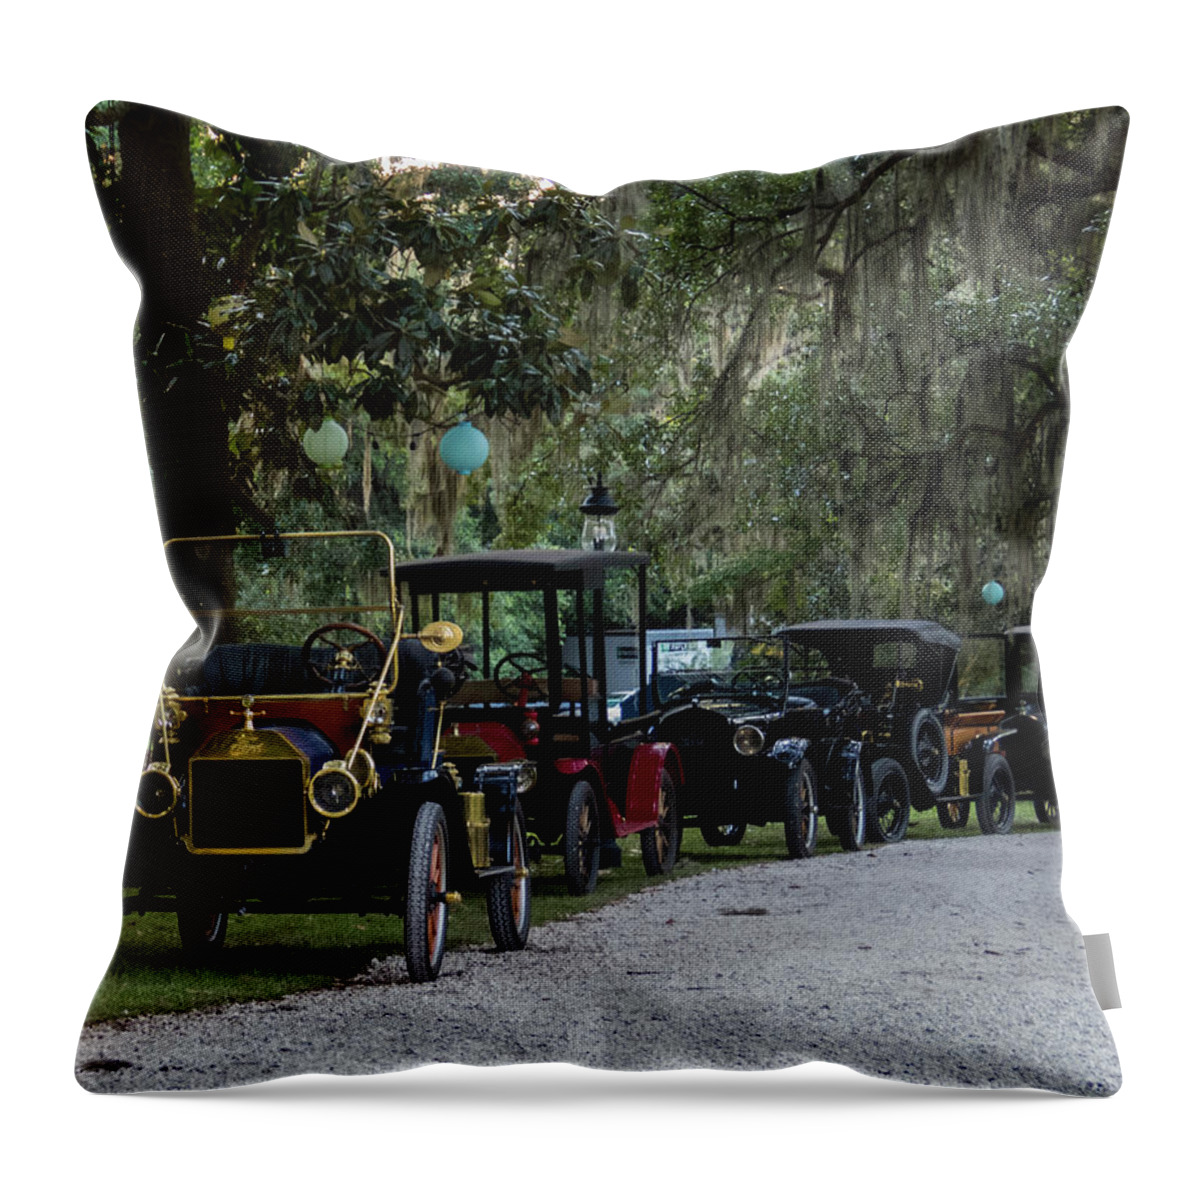 Model T Ford Throw Pillow featuring the photograph Model T's by J M Farris Photography